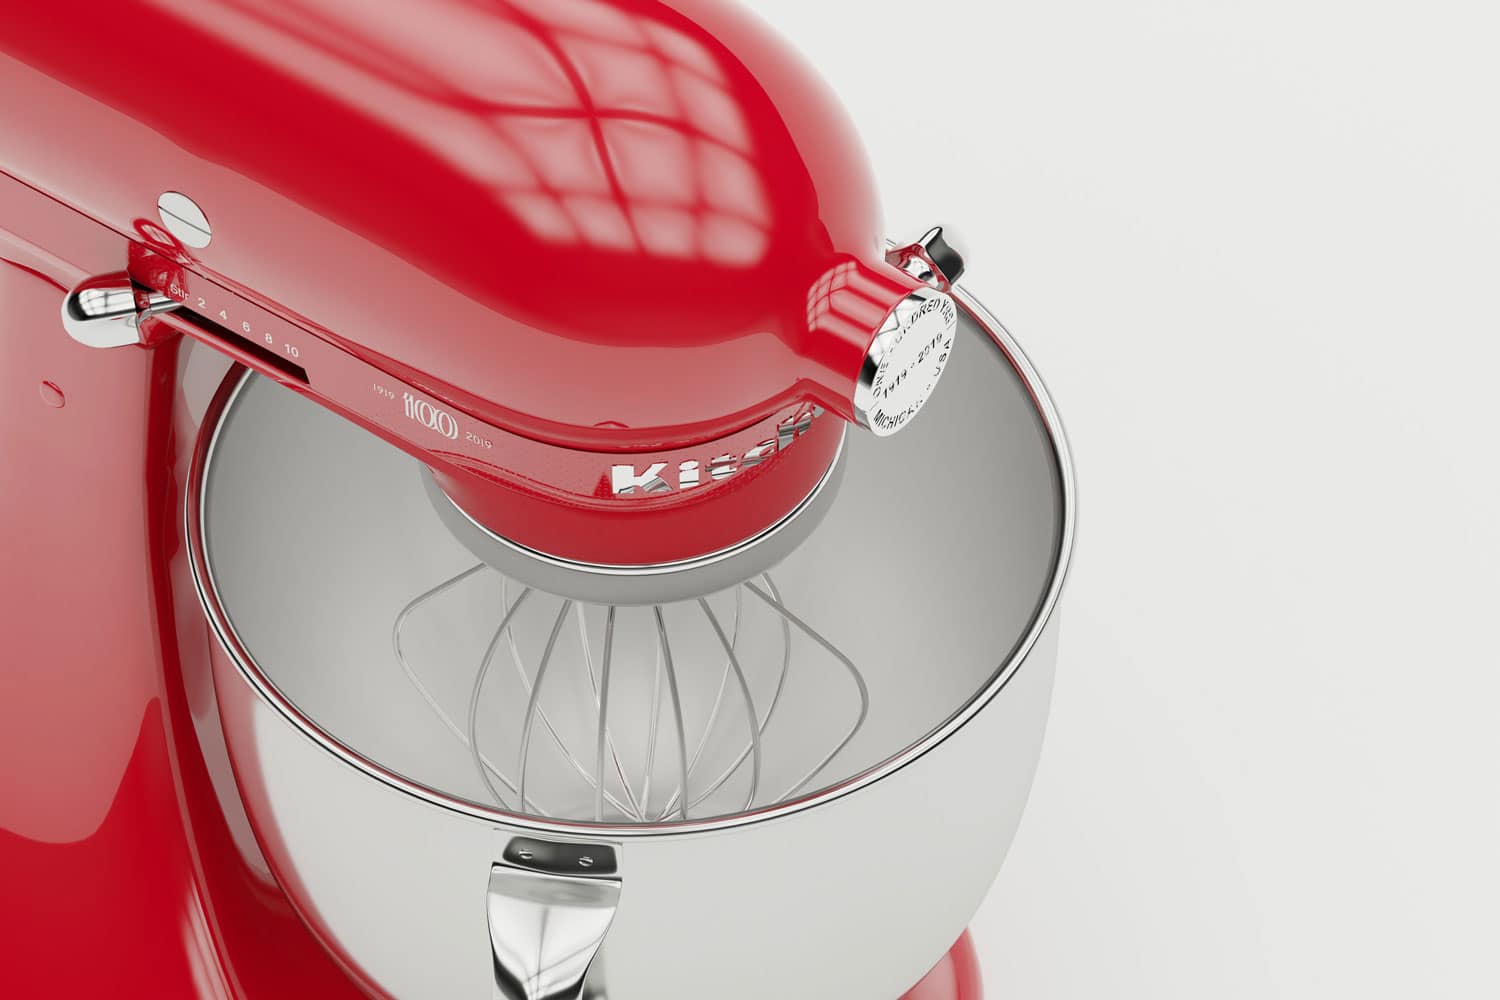 A red KitchenAid on a white background